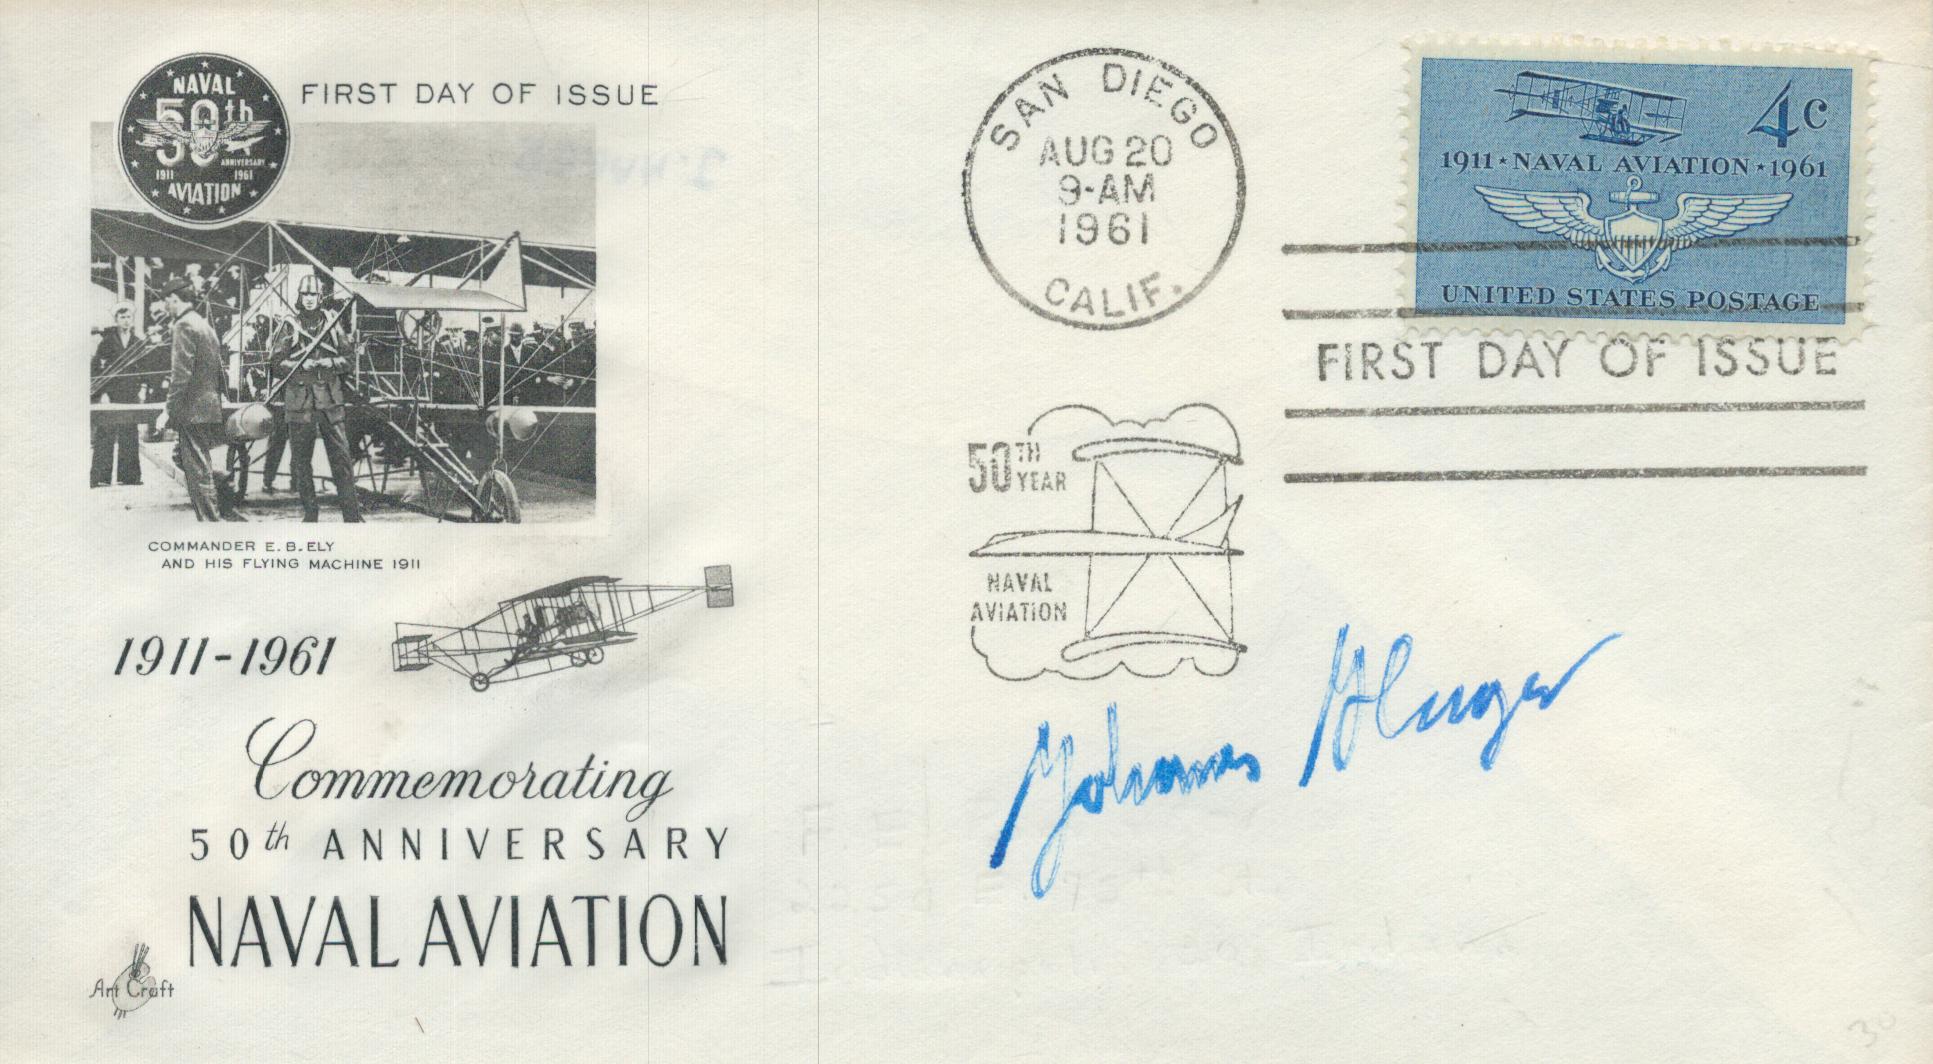 WW2 Luftwaffe night fighter ace Johannes Hager KC signed 1961 US Naval Aviation FDC. 48 victories